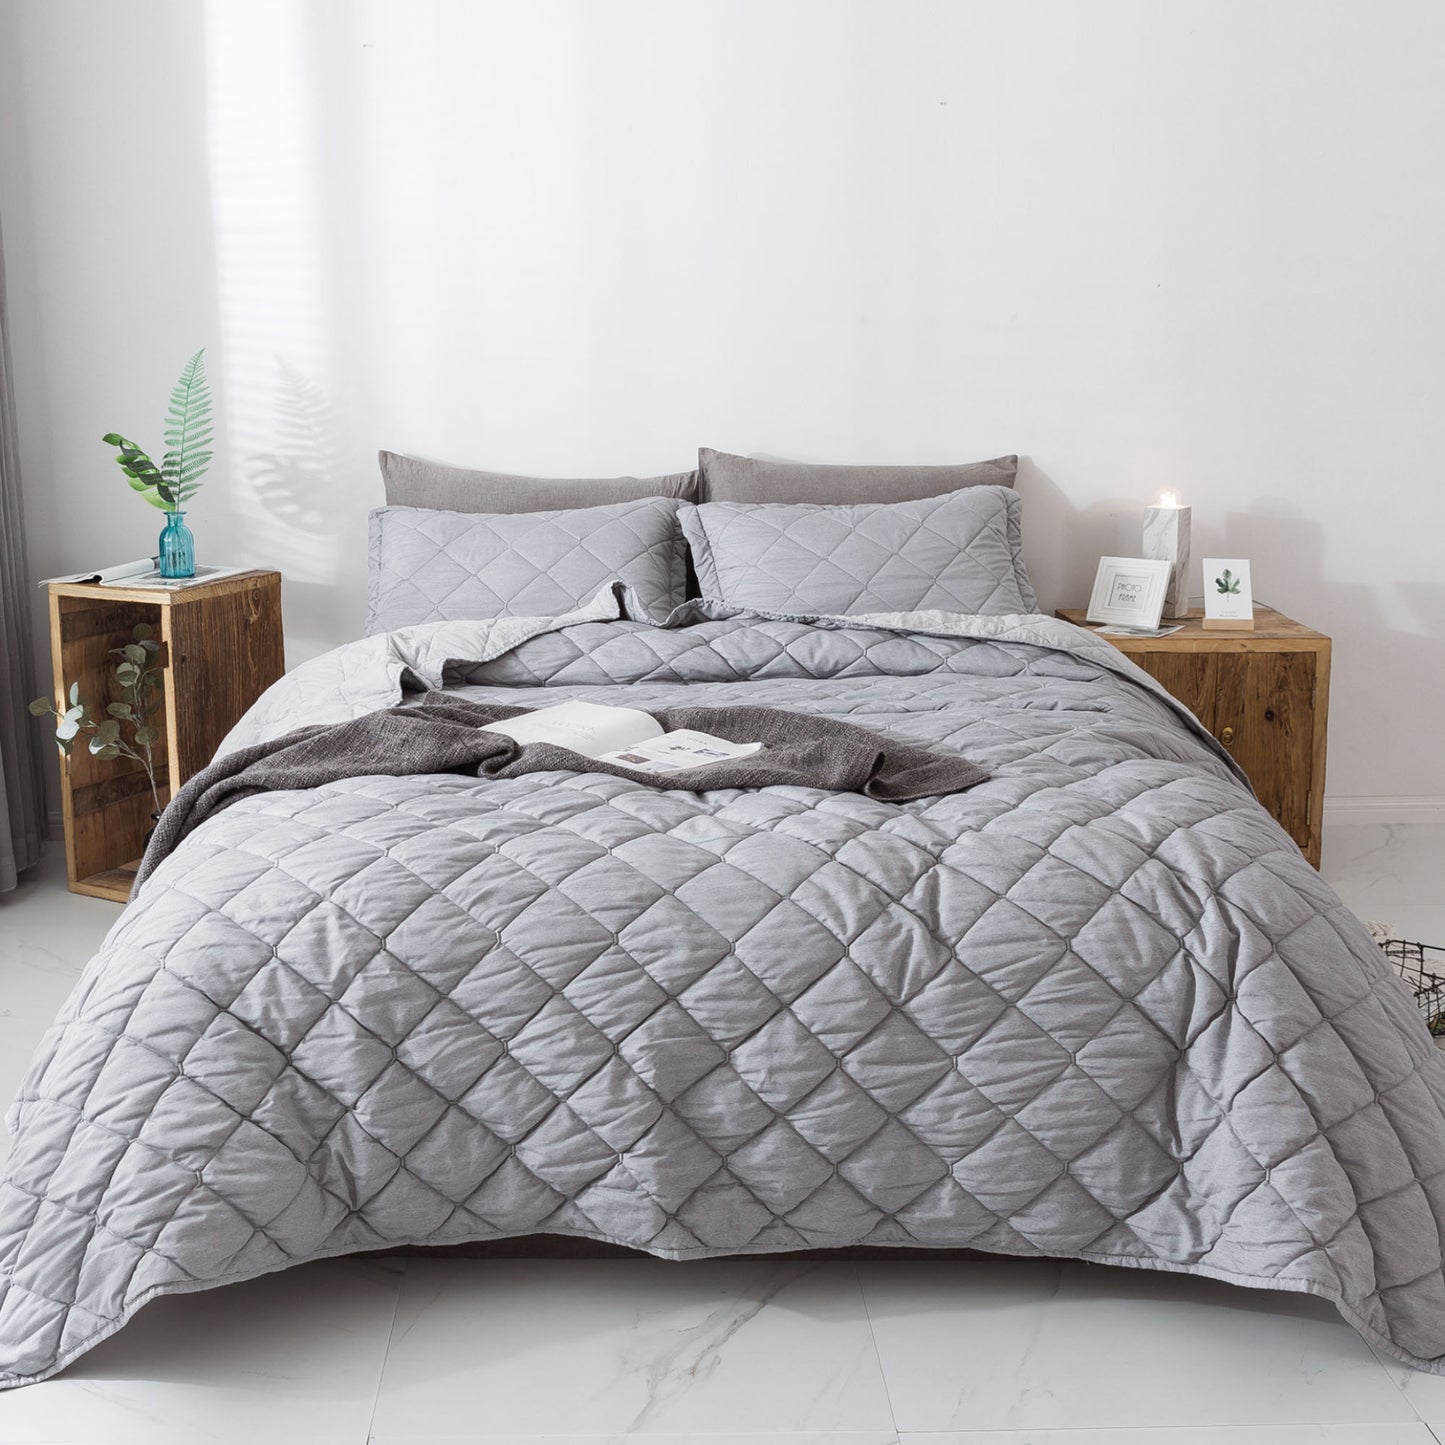 Kasentex Luxury Soft  Prewashed Technique Quilt Set with Box and Stripe Design, Reversible with Shams - Kasentex